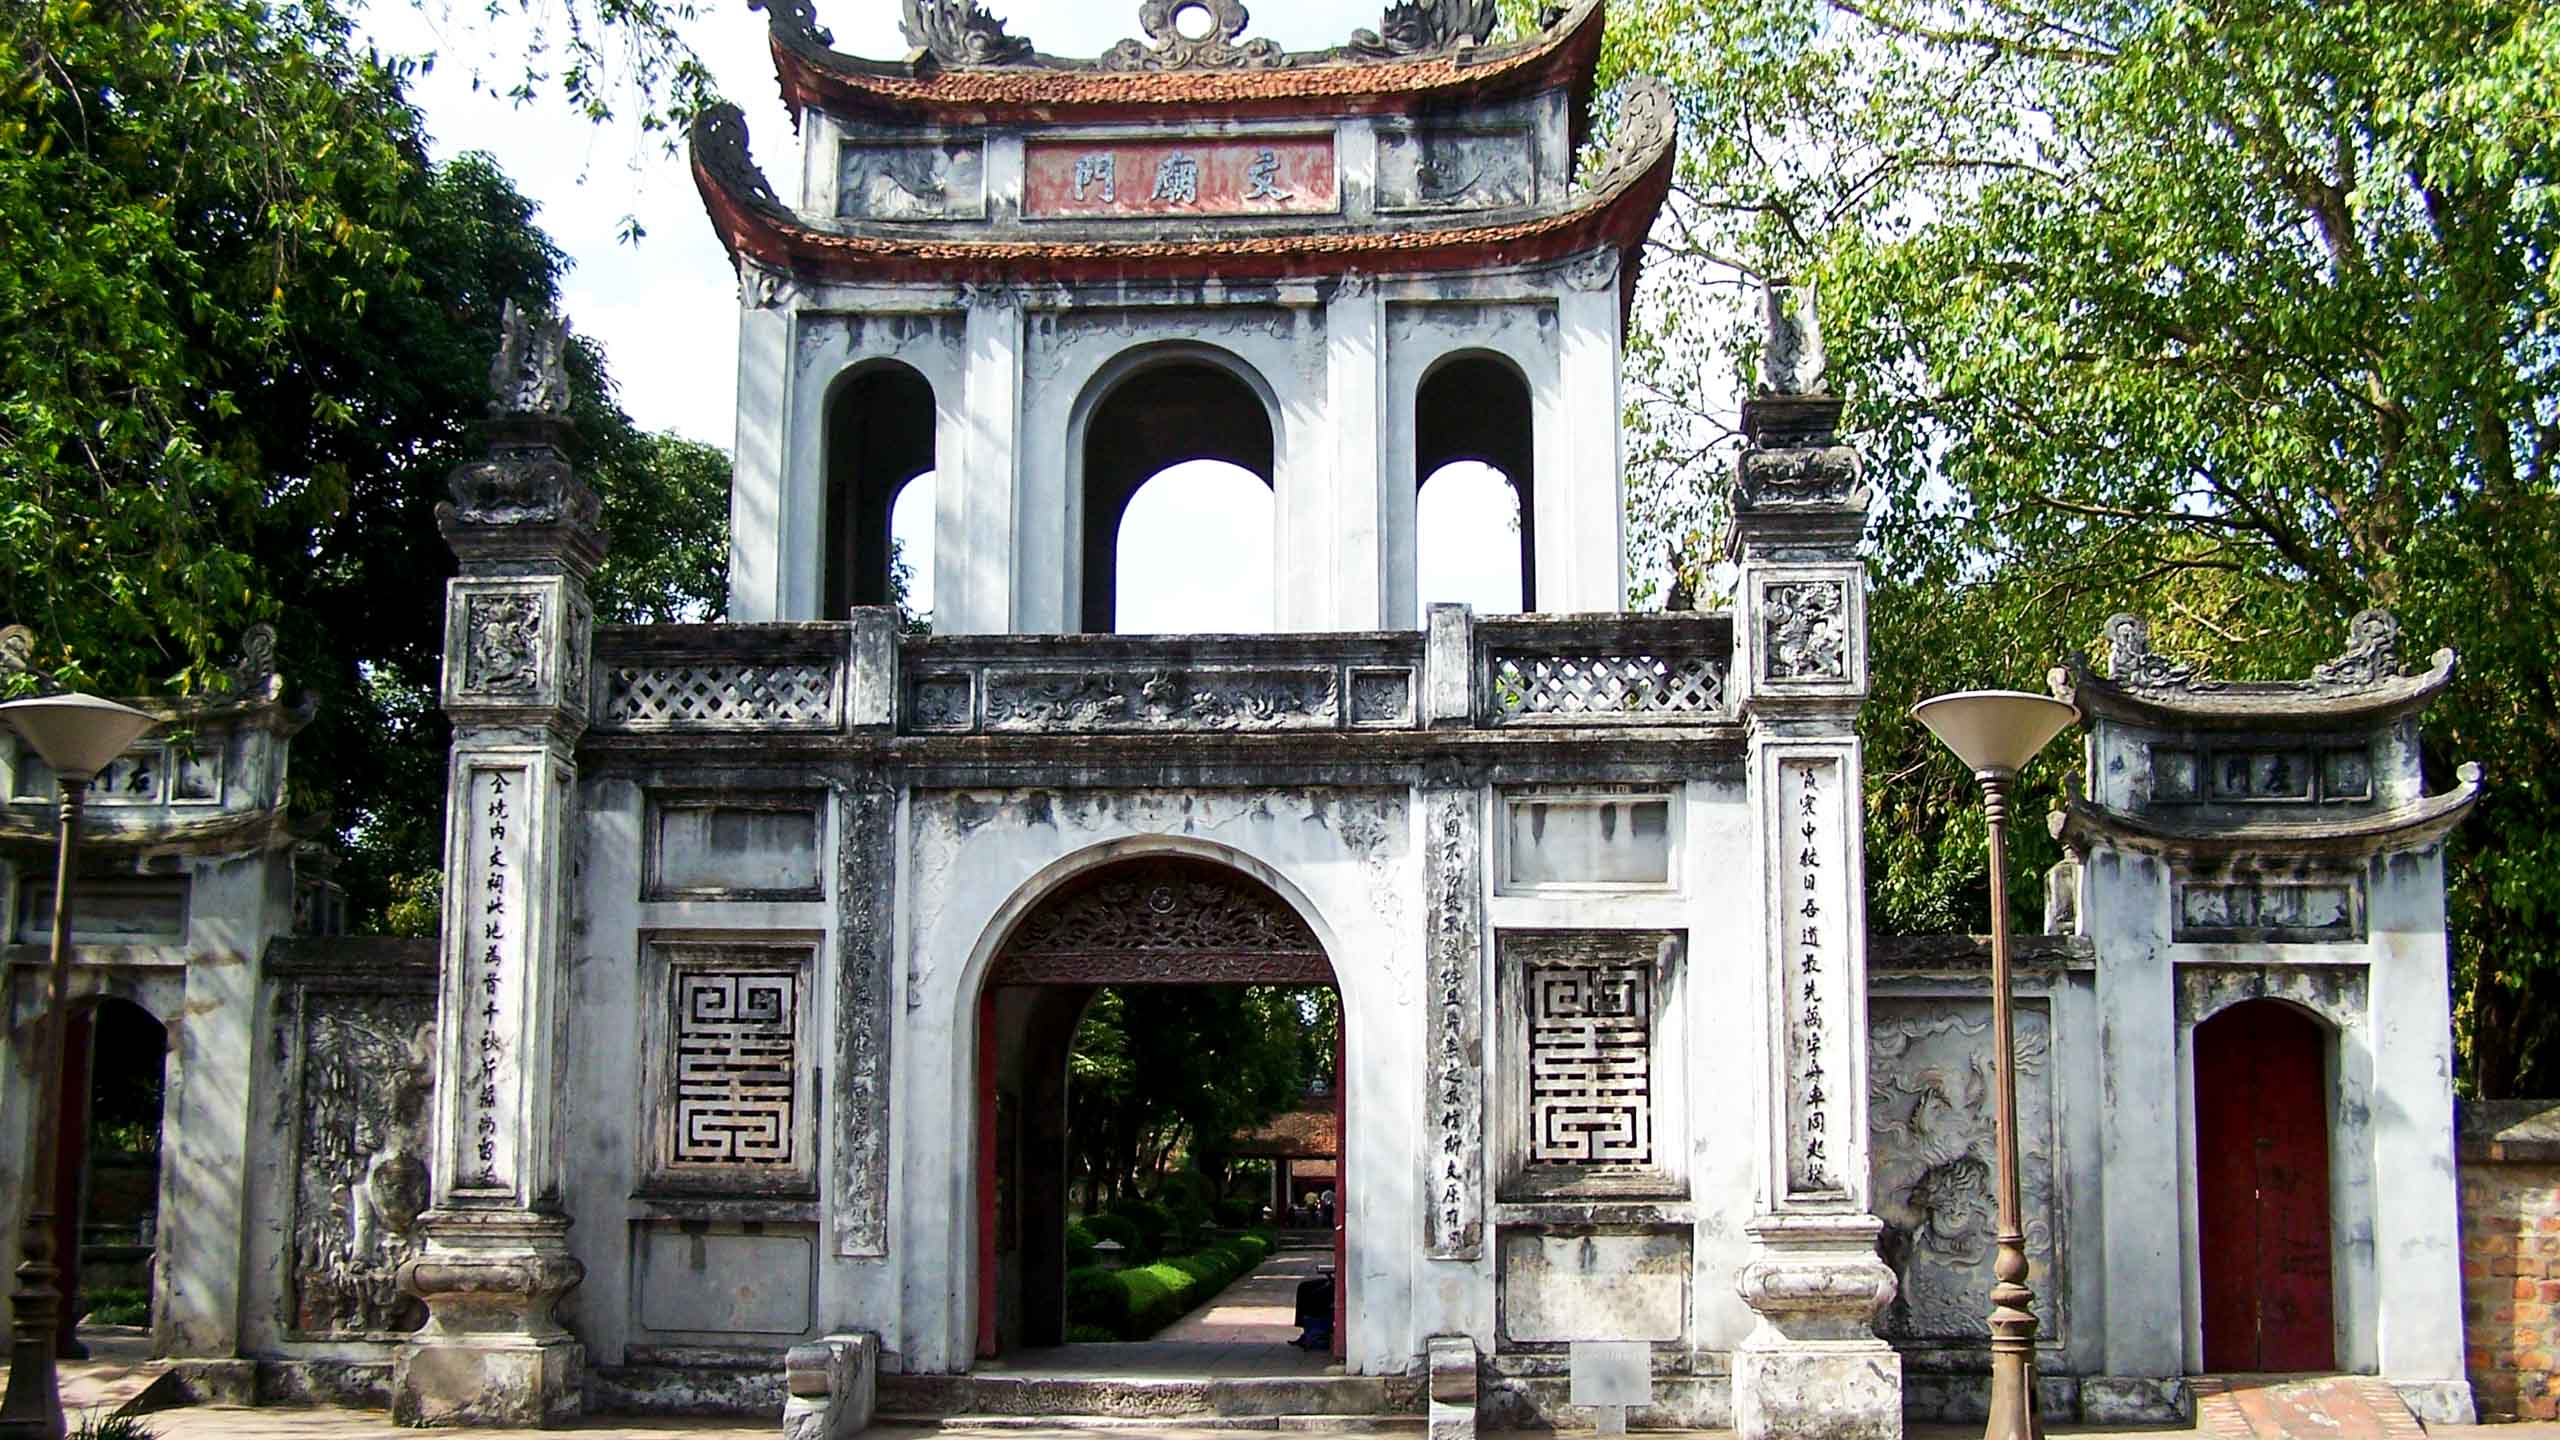 Large gate structure in Vietnam